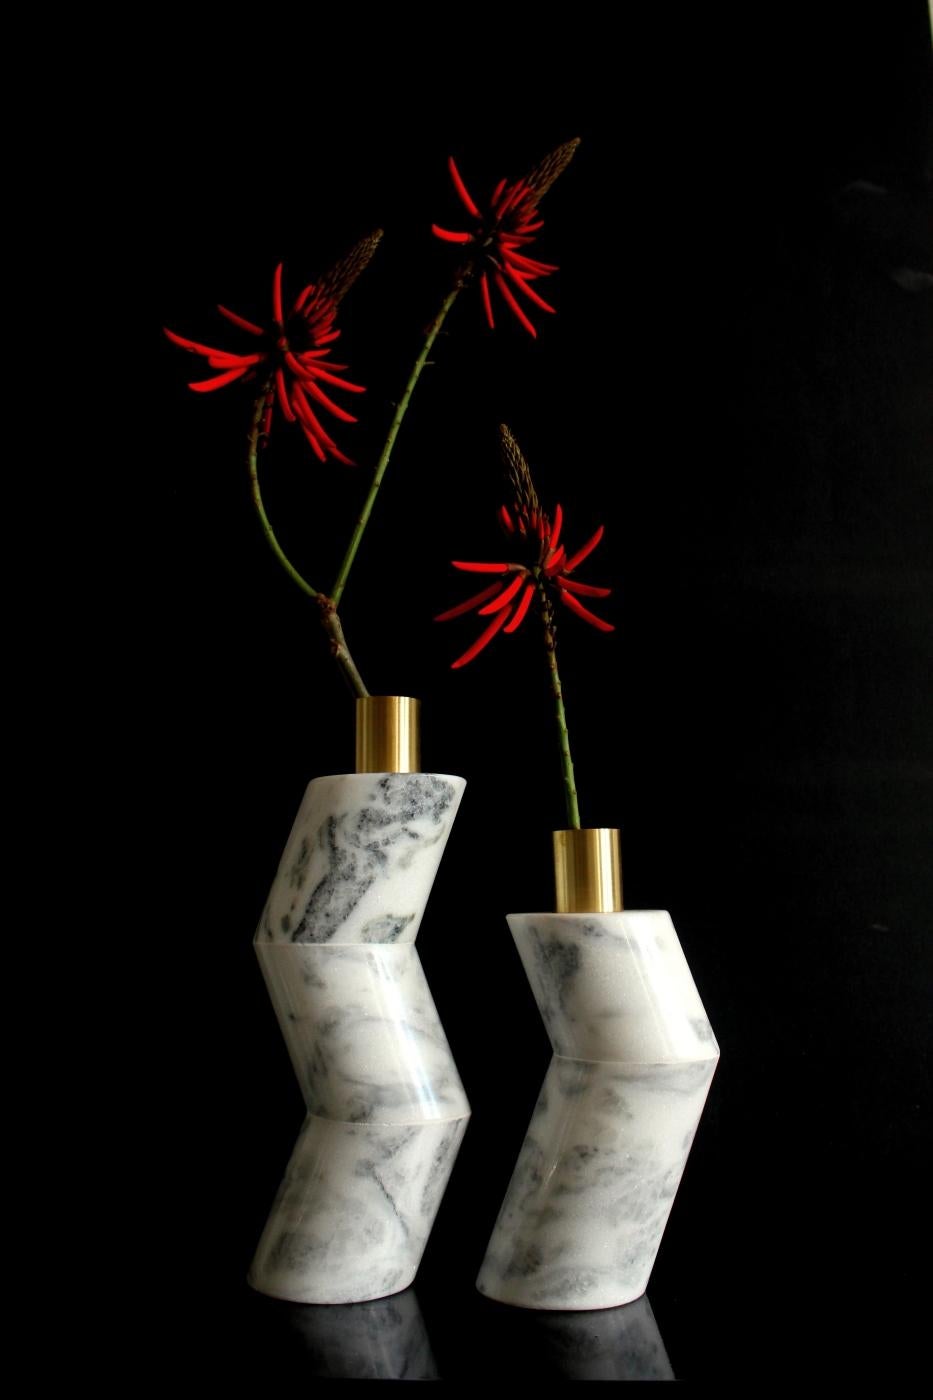 Pair of Ginga vases by Gustavo Dias
Zara chair
Wood: Different Woods are available
Designer: Gustavo Dias
Dimensions: 
Tall 34 x 9 x 9 cm
Short 27 x 9 x 9 cm
Available in wood and marble


Gustavo Dias
One the most important contemporary